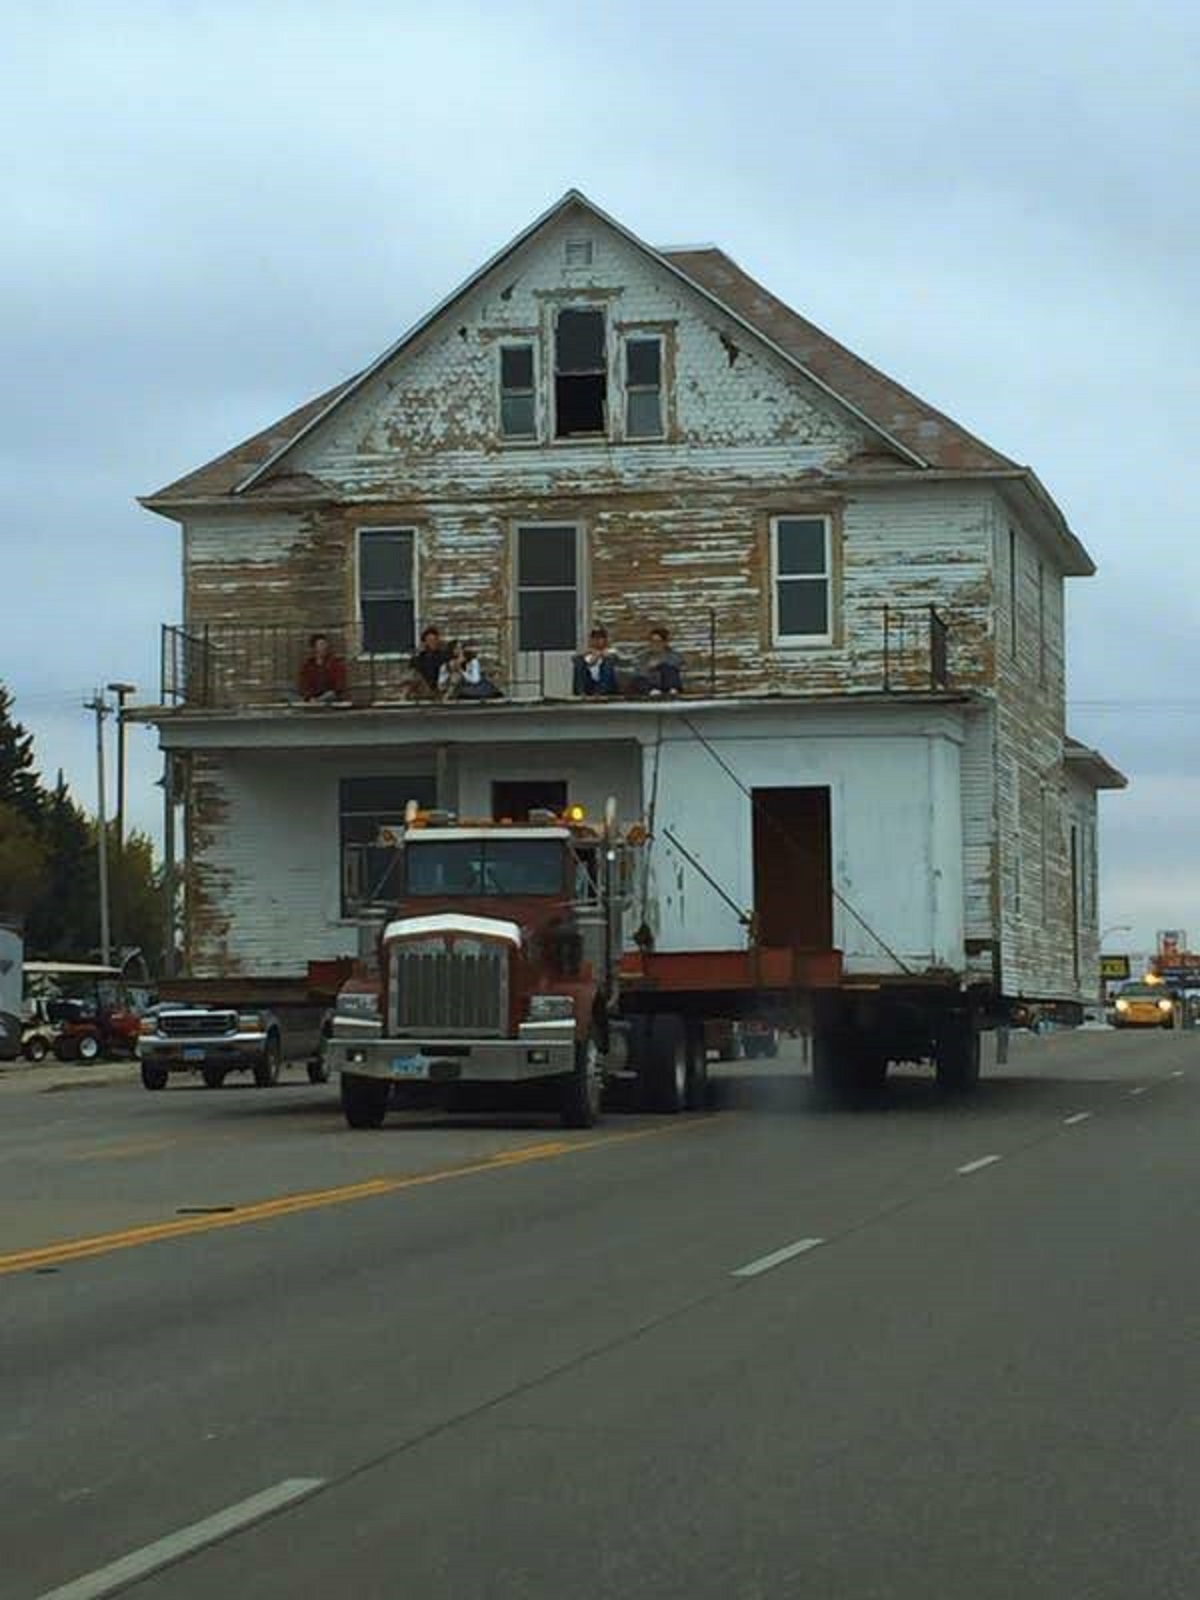 You can move an entire house with a truck: